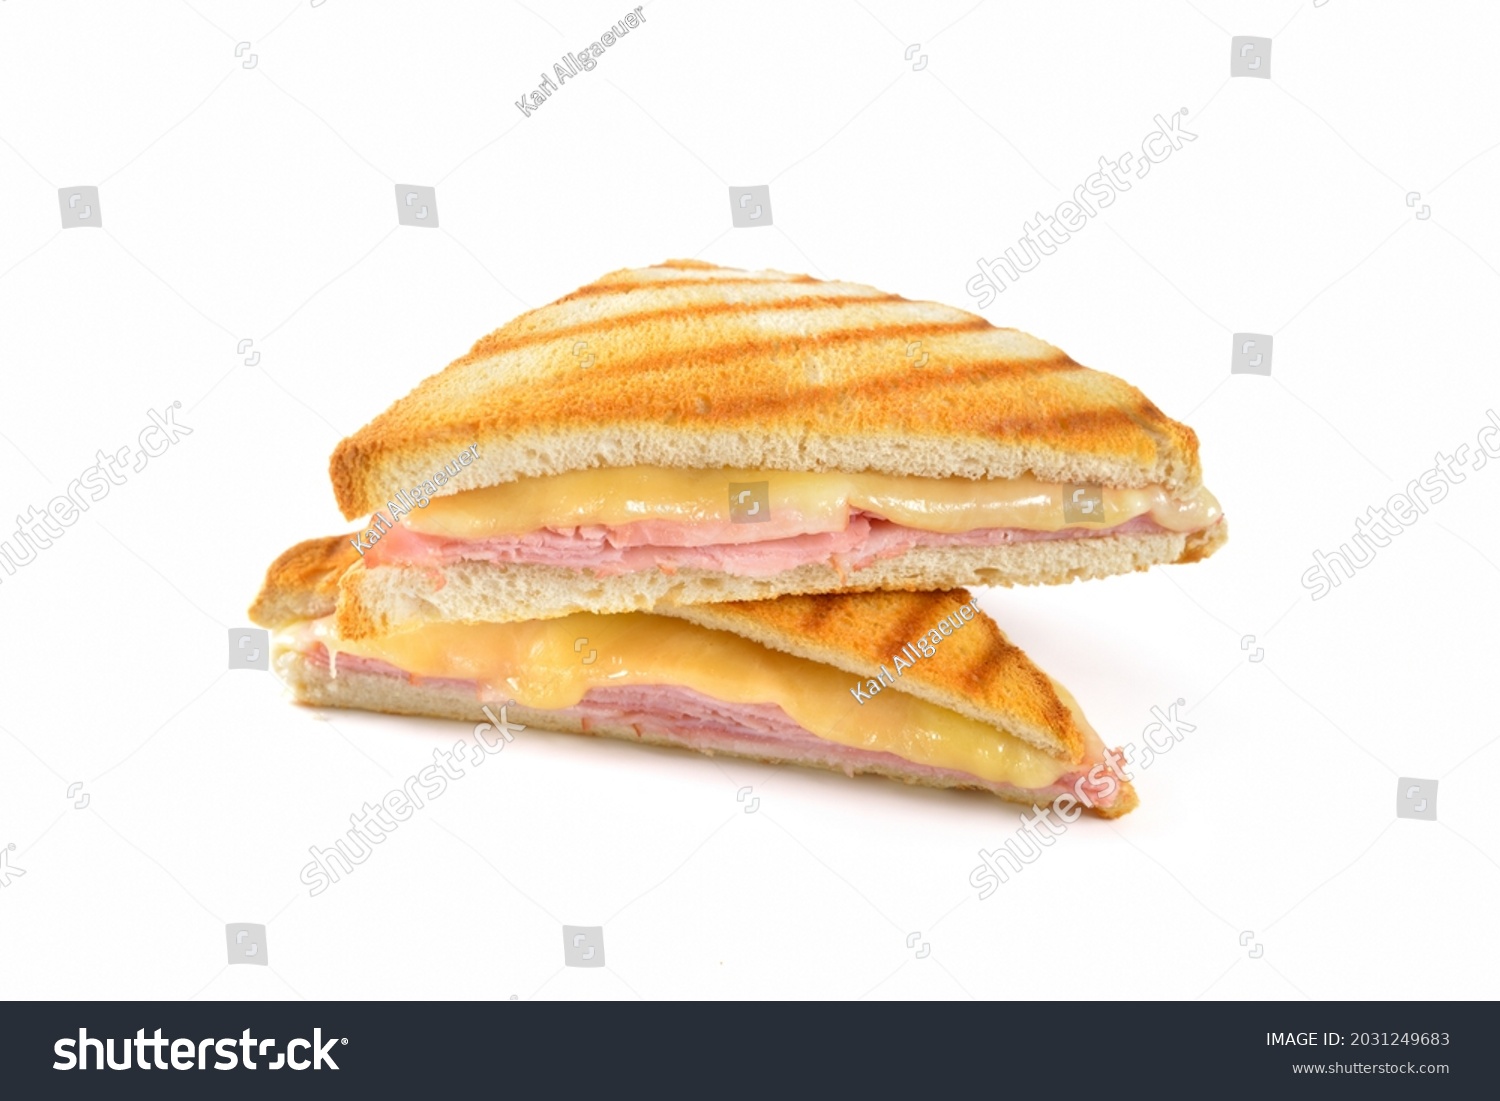  Pressed and toasted sandwich with ham and cheese on white background #2031249683